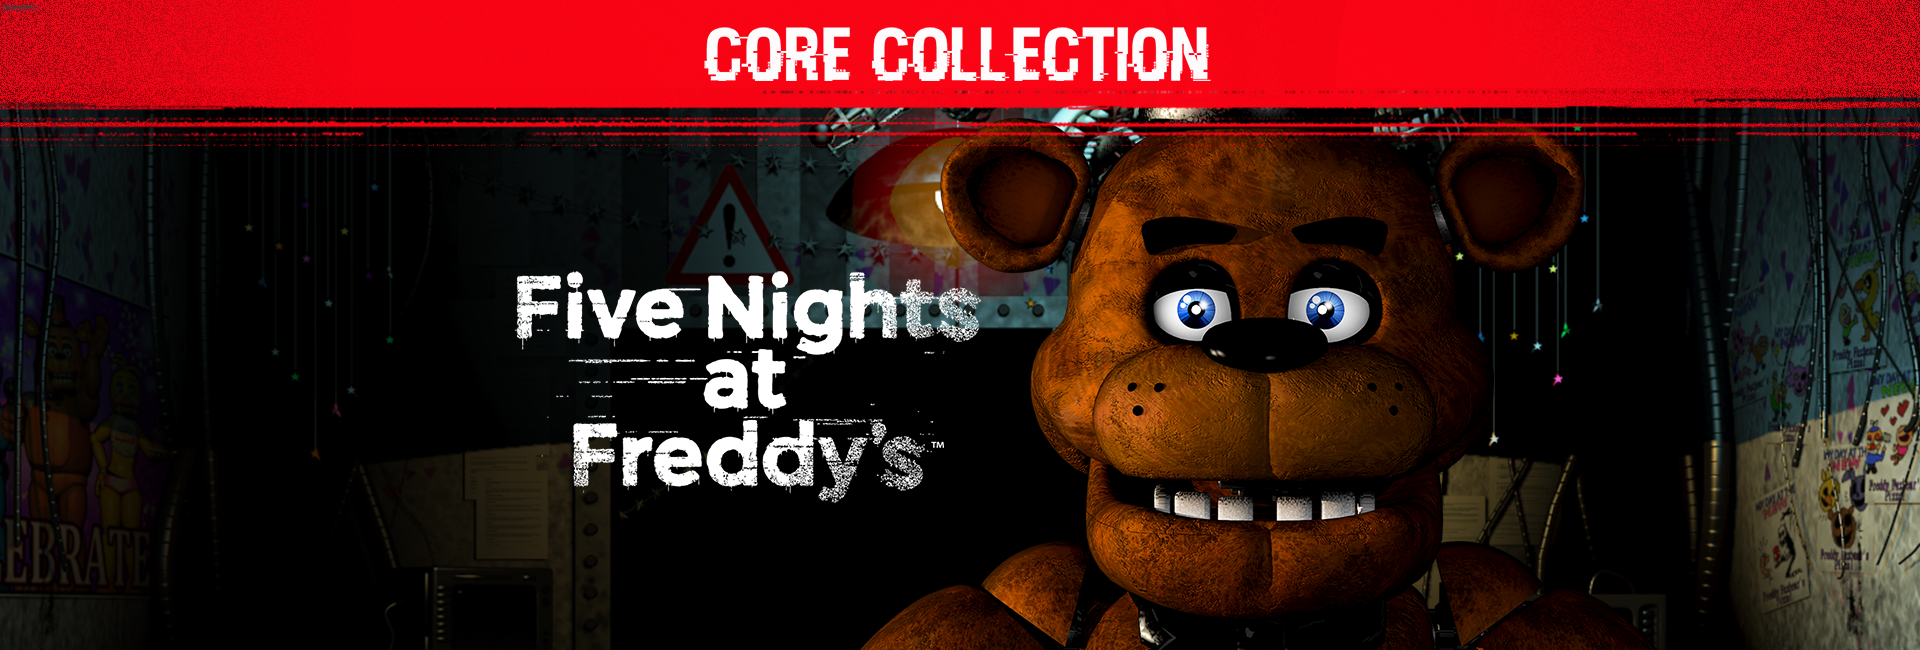 Five Nights At Freddy S Core Collection